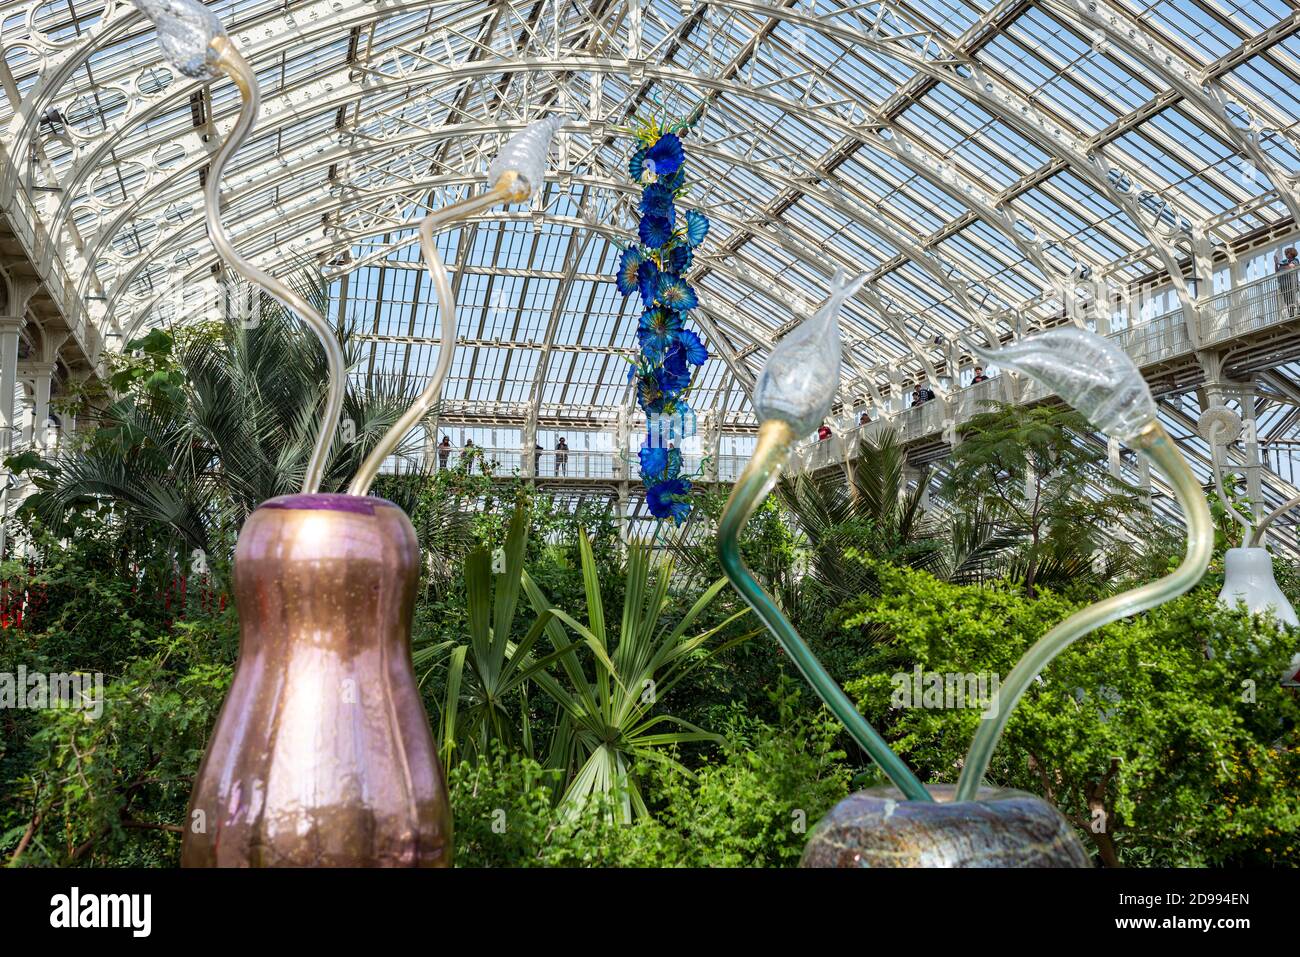 Dale Chihuly Artwork exposed in Kew Gardens Stock Photo